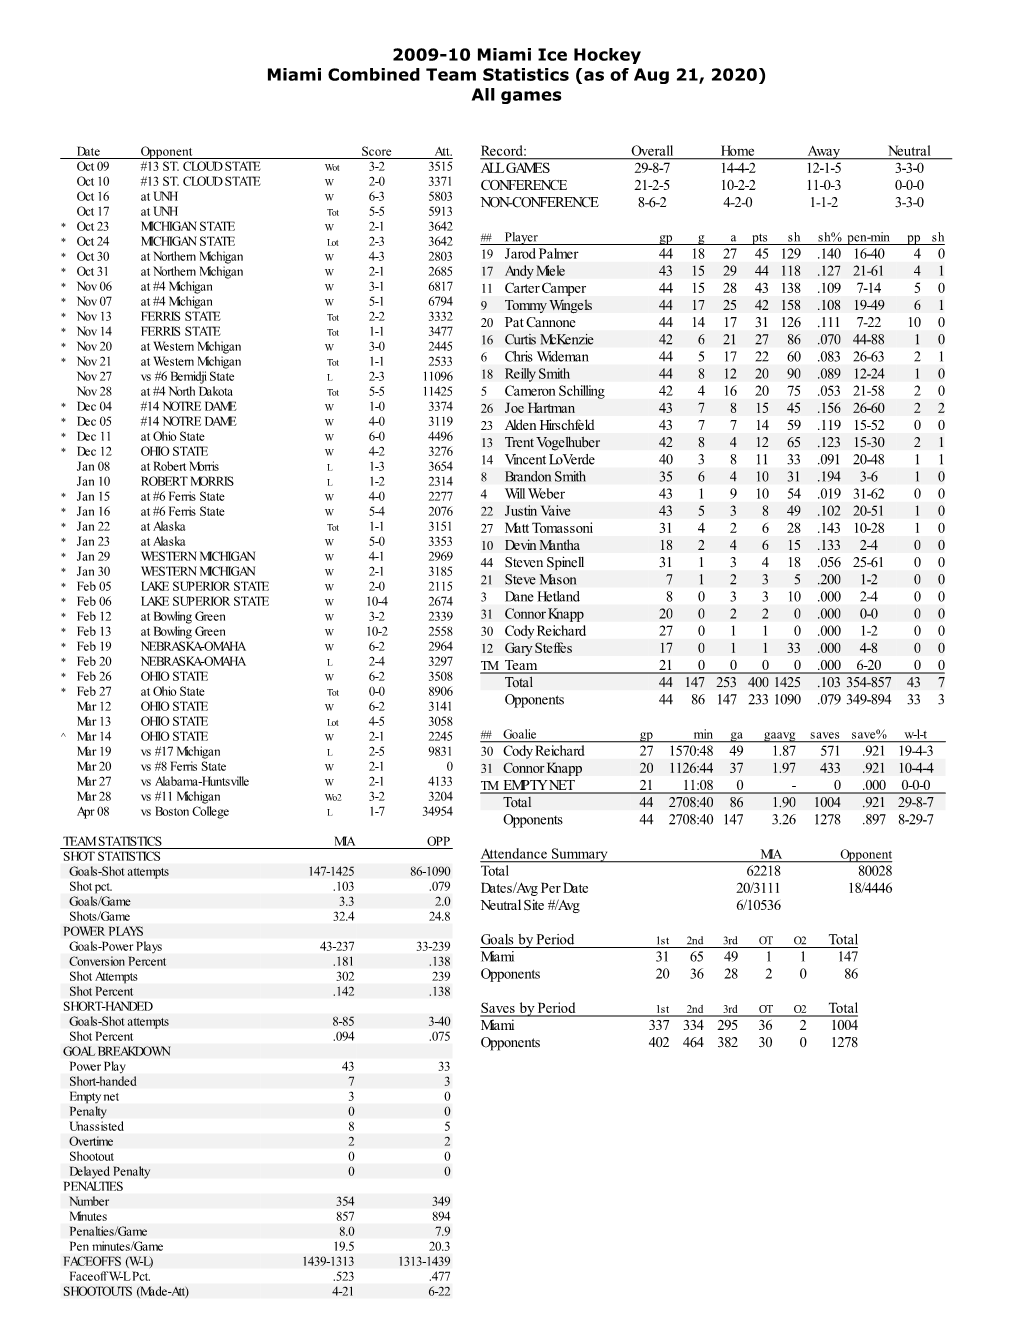 2009-10 Miami Ice Hockey Miami Combined Team Statistics (As of Aug 21, 2020) All Games